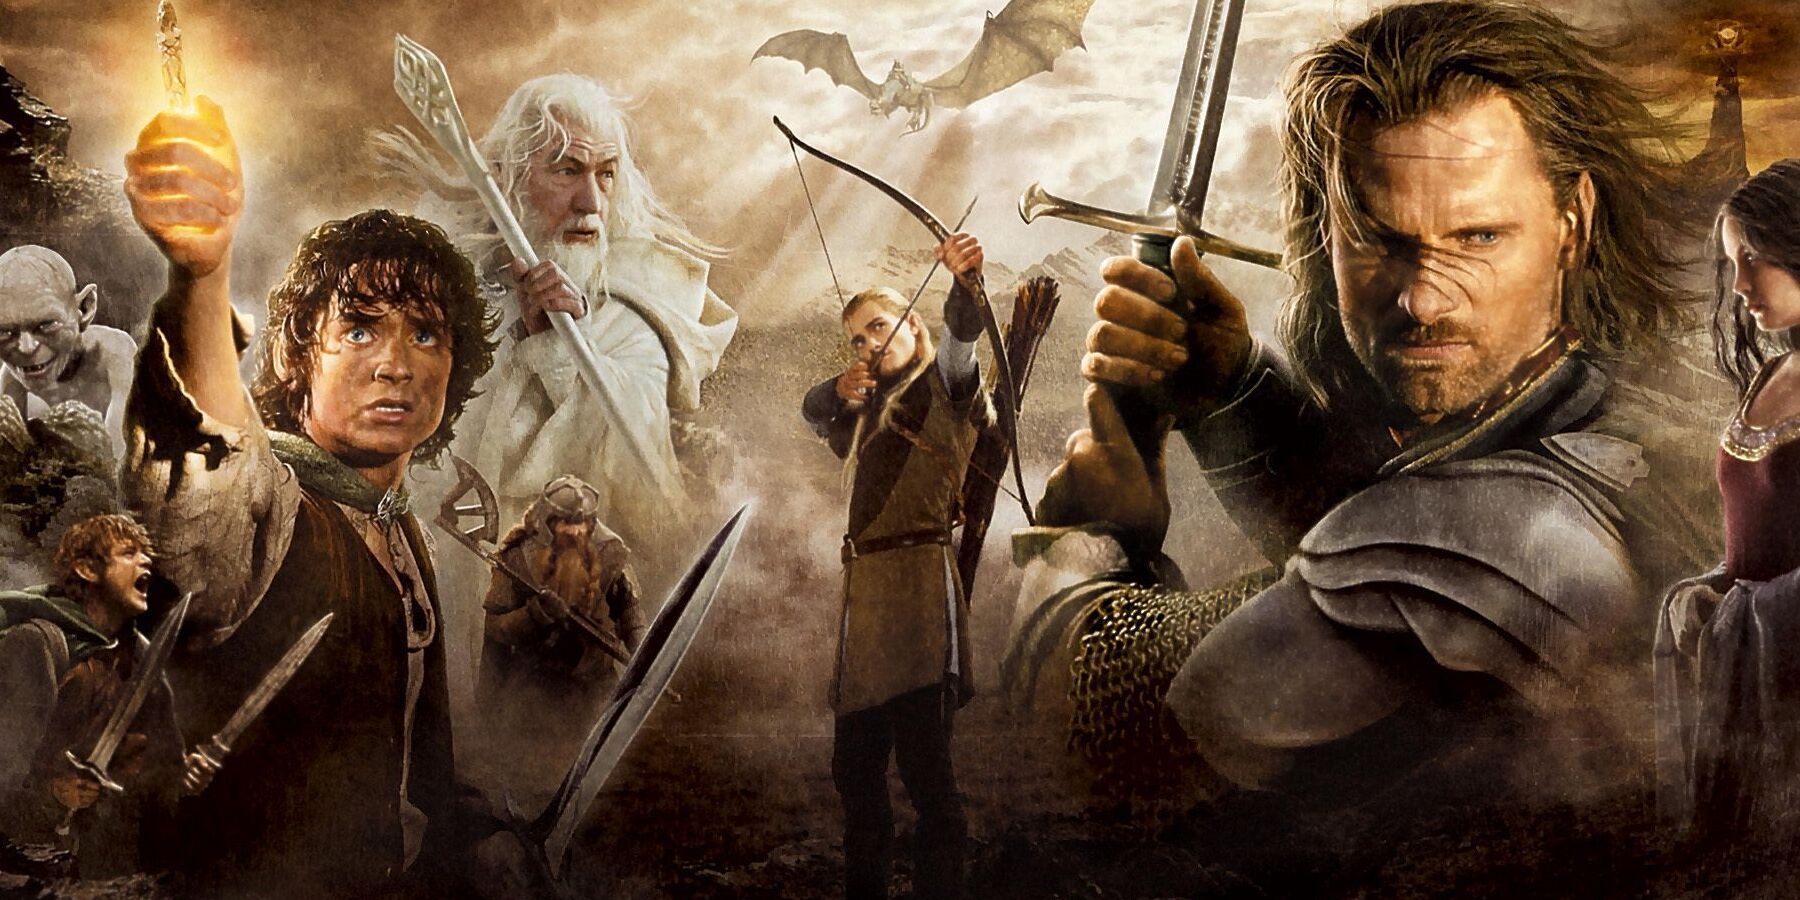 Epic Games Announces New EGS Exclusive Lord of the Rings Game